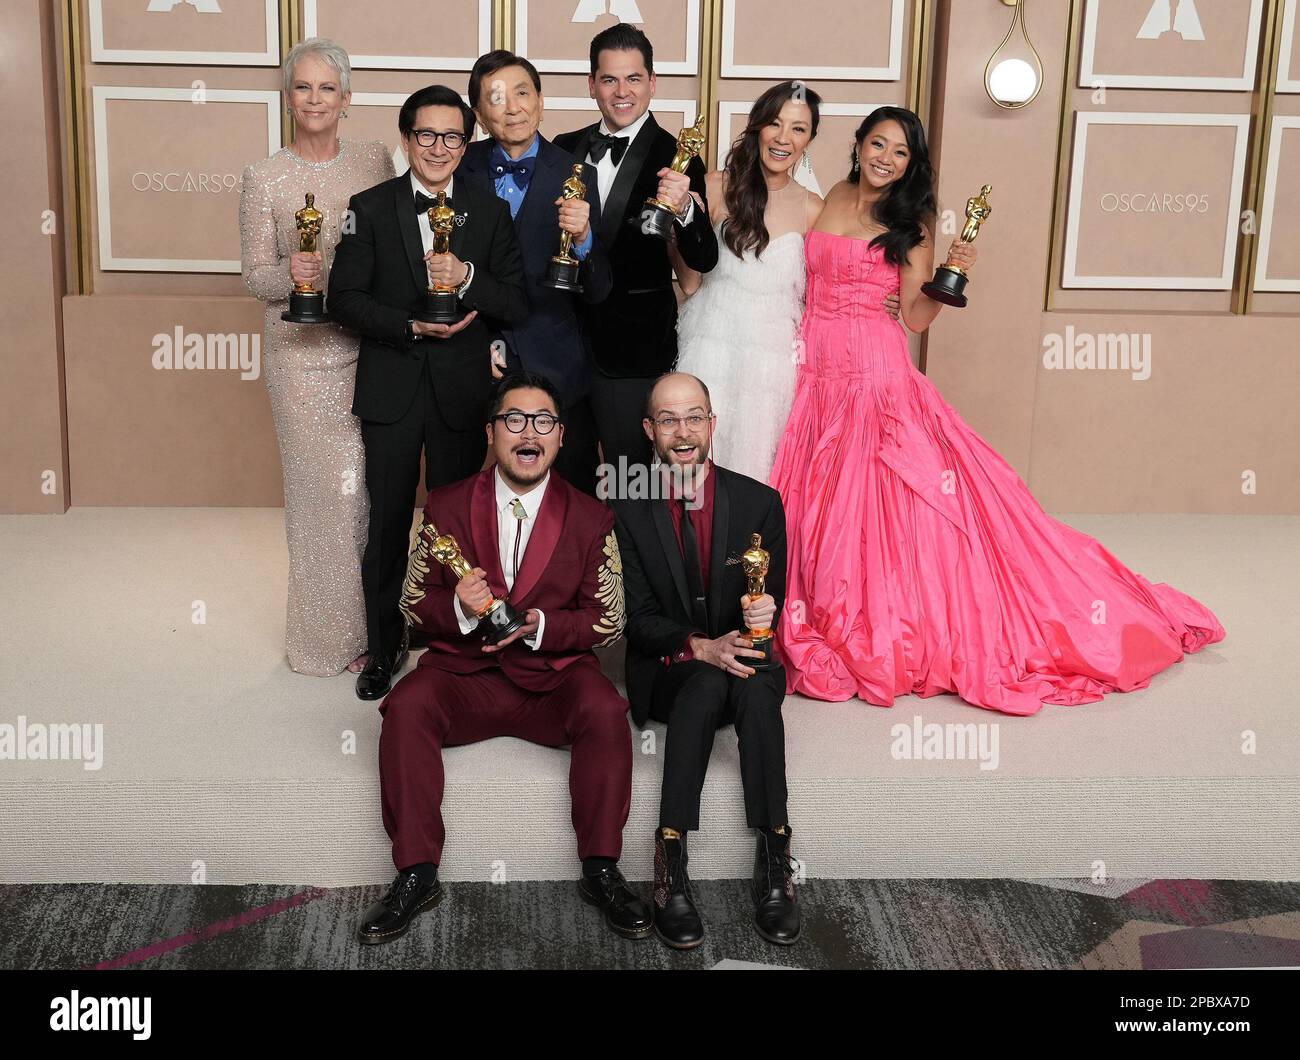 Los Angeles, USA. 12th Mar, 2023. (Top L-R) The cast and crew of 'Everything Everywhere All at Once' Jamie Lee Curtis, Ke Huy Quan, James Hong, Jonathan Wang, Michelle Yeoh, Stephanie Hsu, (Bottom L-R) Daniel Kwan and Daniel Scheinert pose with their Oscar trophies in the press room at the The 95th Academy Awards held by the Academy of Motion Picture Arts and Sciences at the Dolby Theatre in Los Angeles, CA on March 12, 2023. (Photo by Sthanlee B. Mirador/Sipa USA) Credit: Sipa USA/Alamy Live News Stock Photo